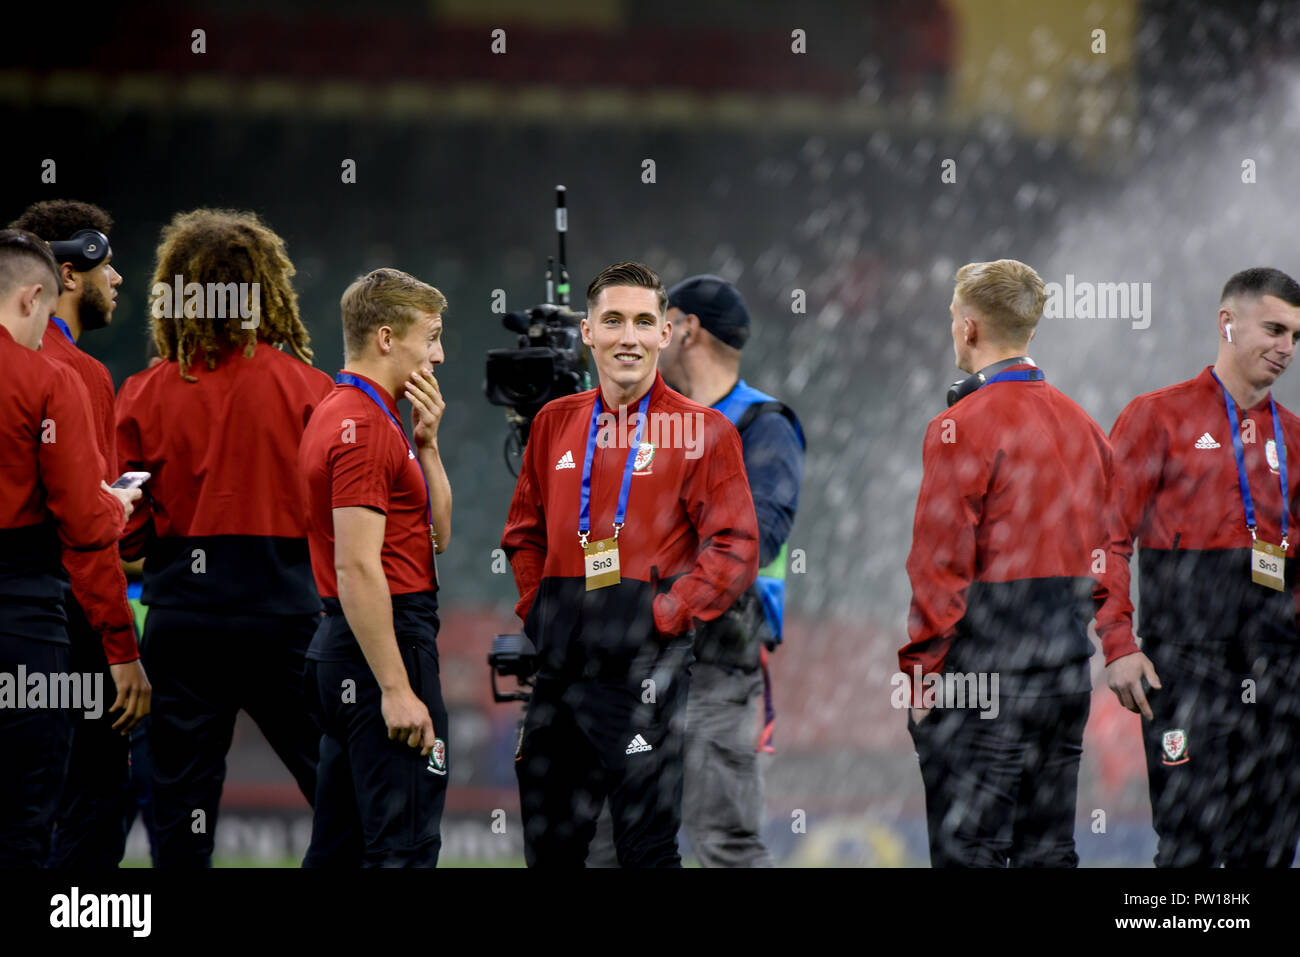 Cardiff, UK. 11th Oct 2018. Wales v Spain, International Football Friendly, National Stadium of Wales, 11/10/18: Wales players out checking the pitch at National Stadium of Wales Credit: Andrew Dowling/Influential Photography/Alamy Live News Stock Photo